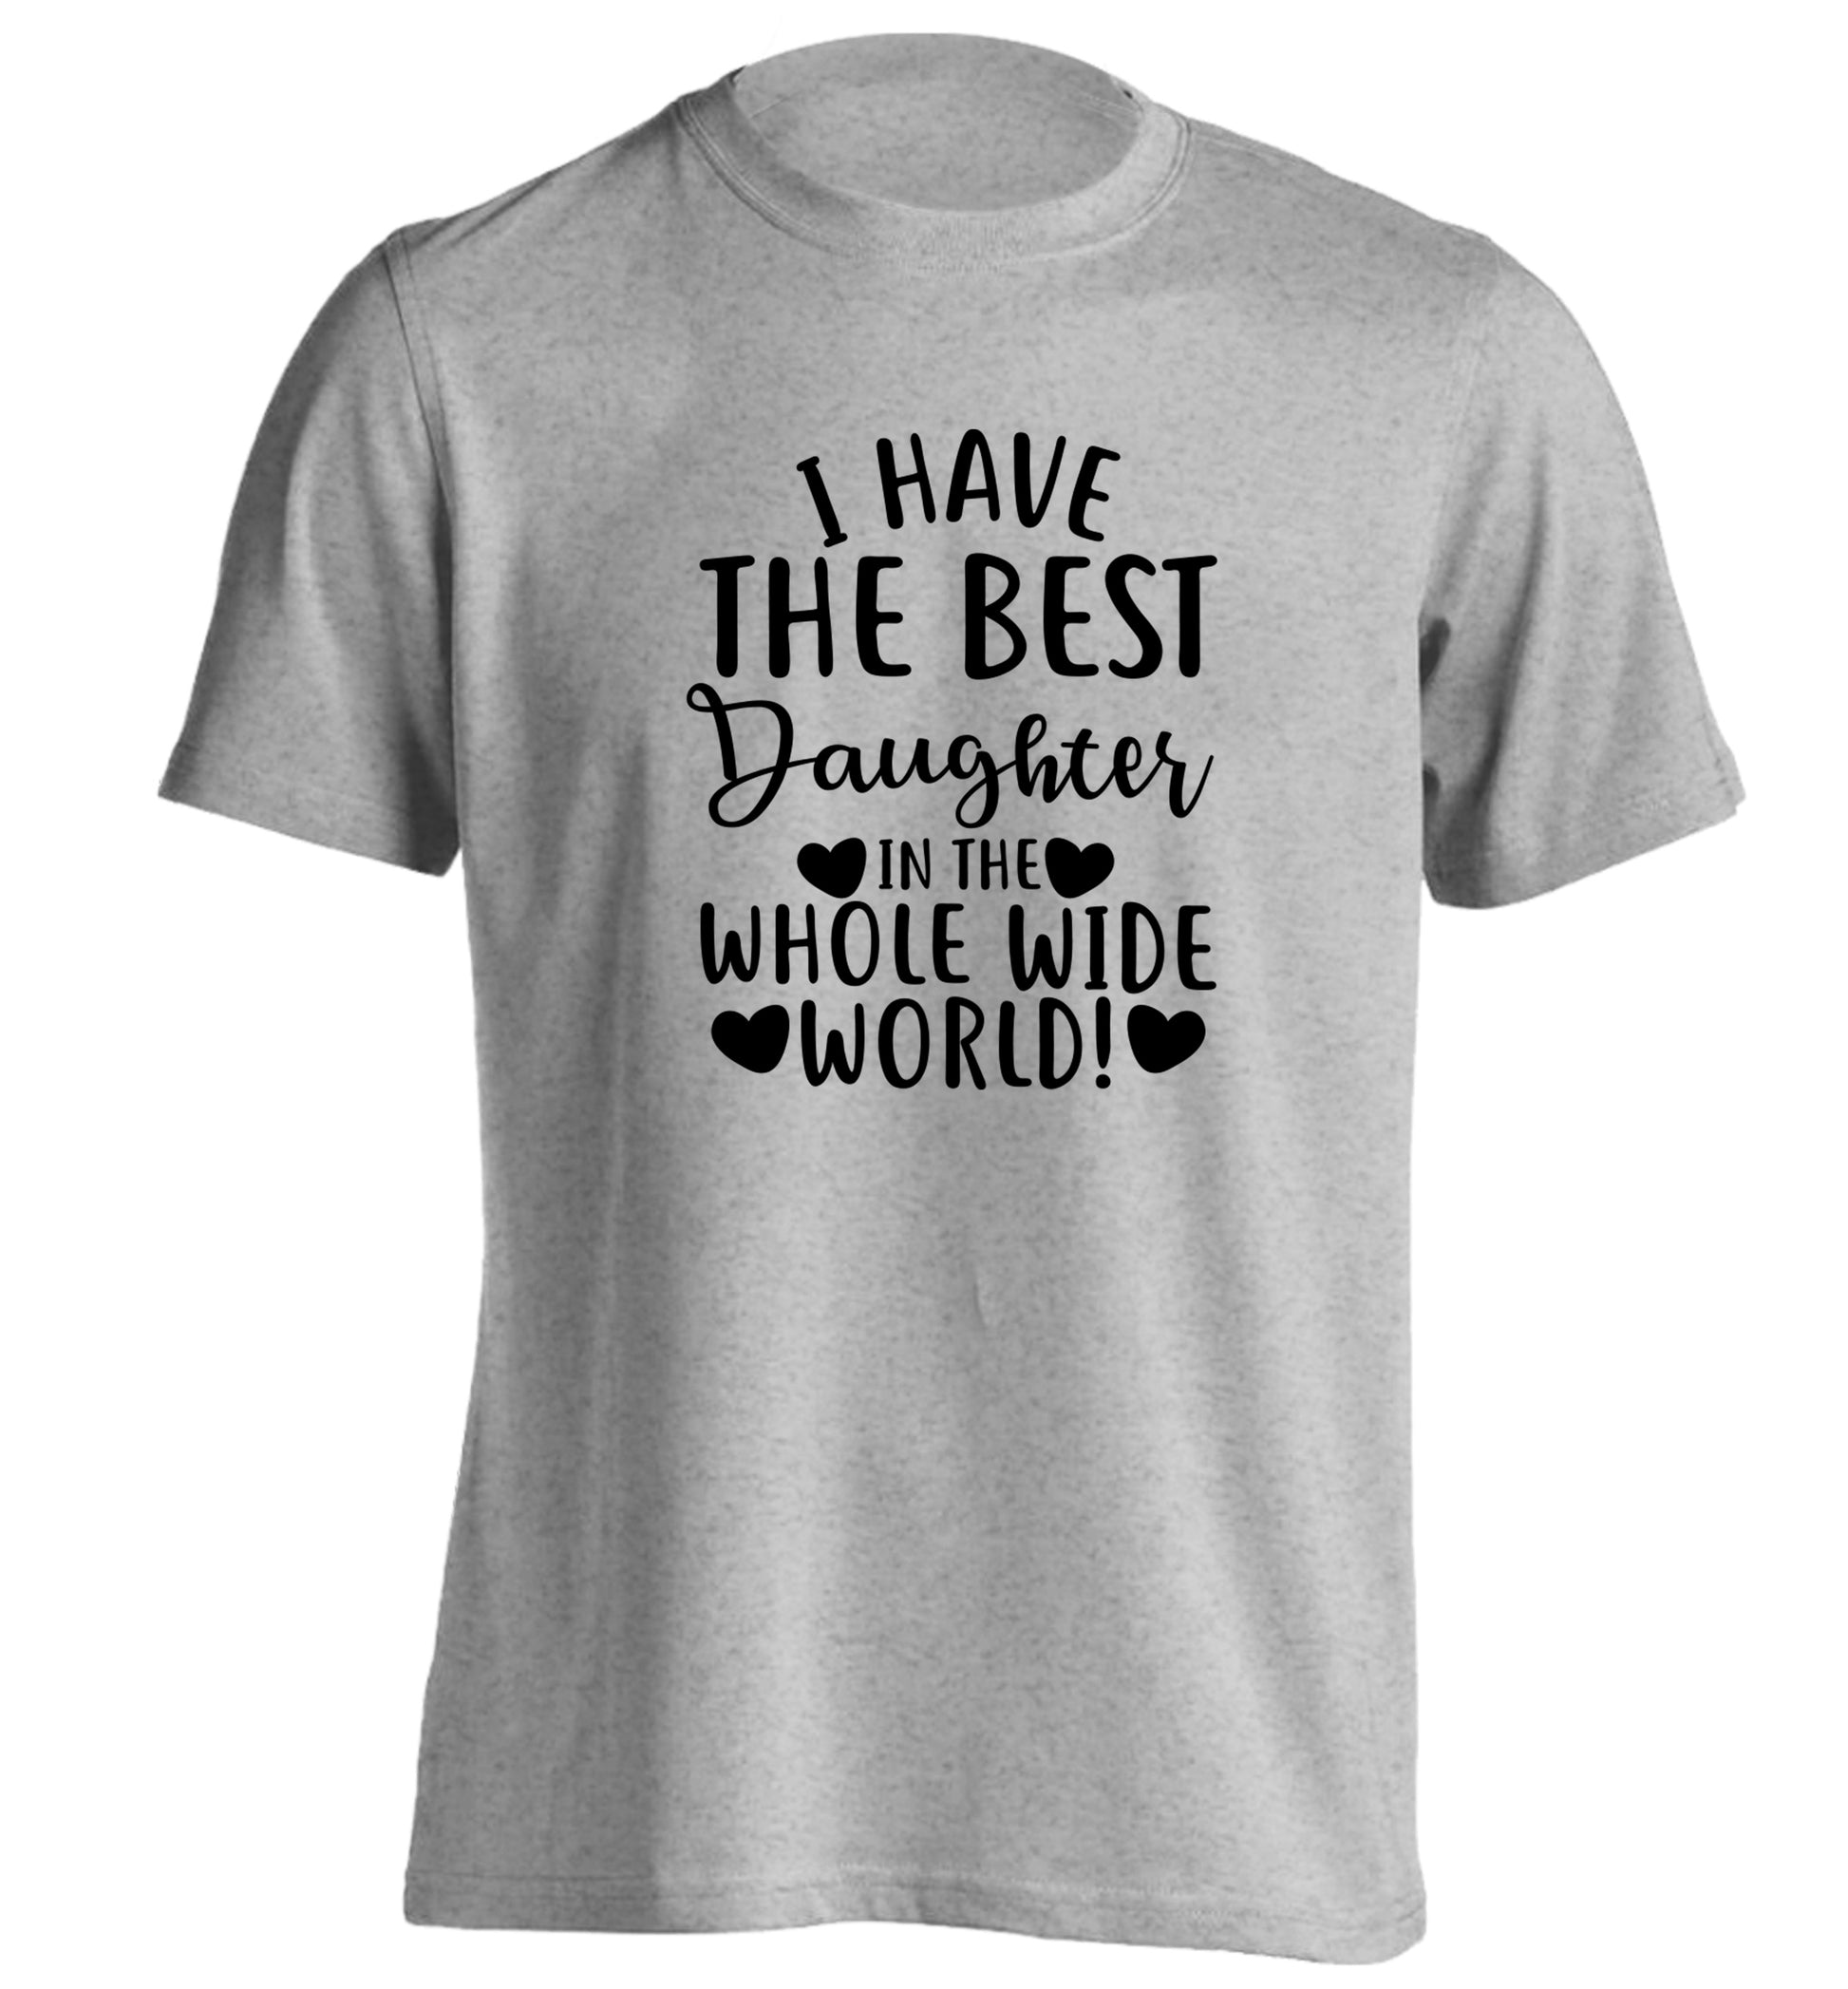 I have the best daughter in the whole wide world! adults unisex grey Tshirt 2XL